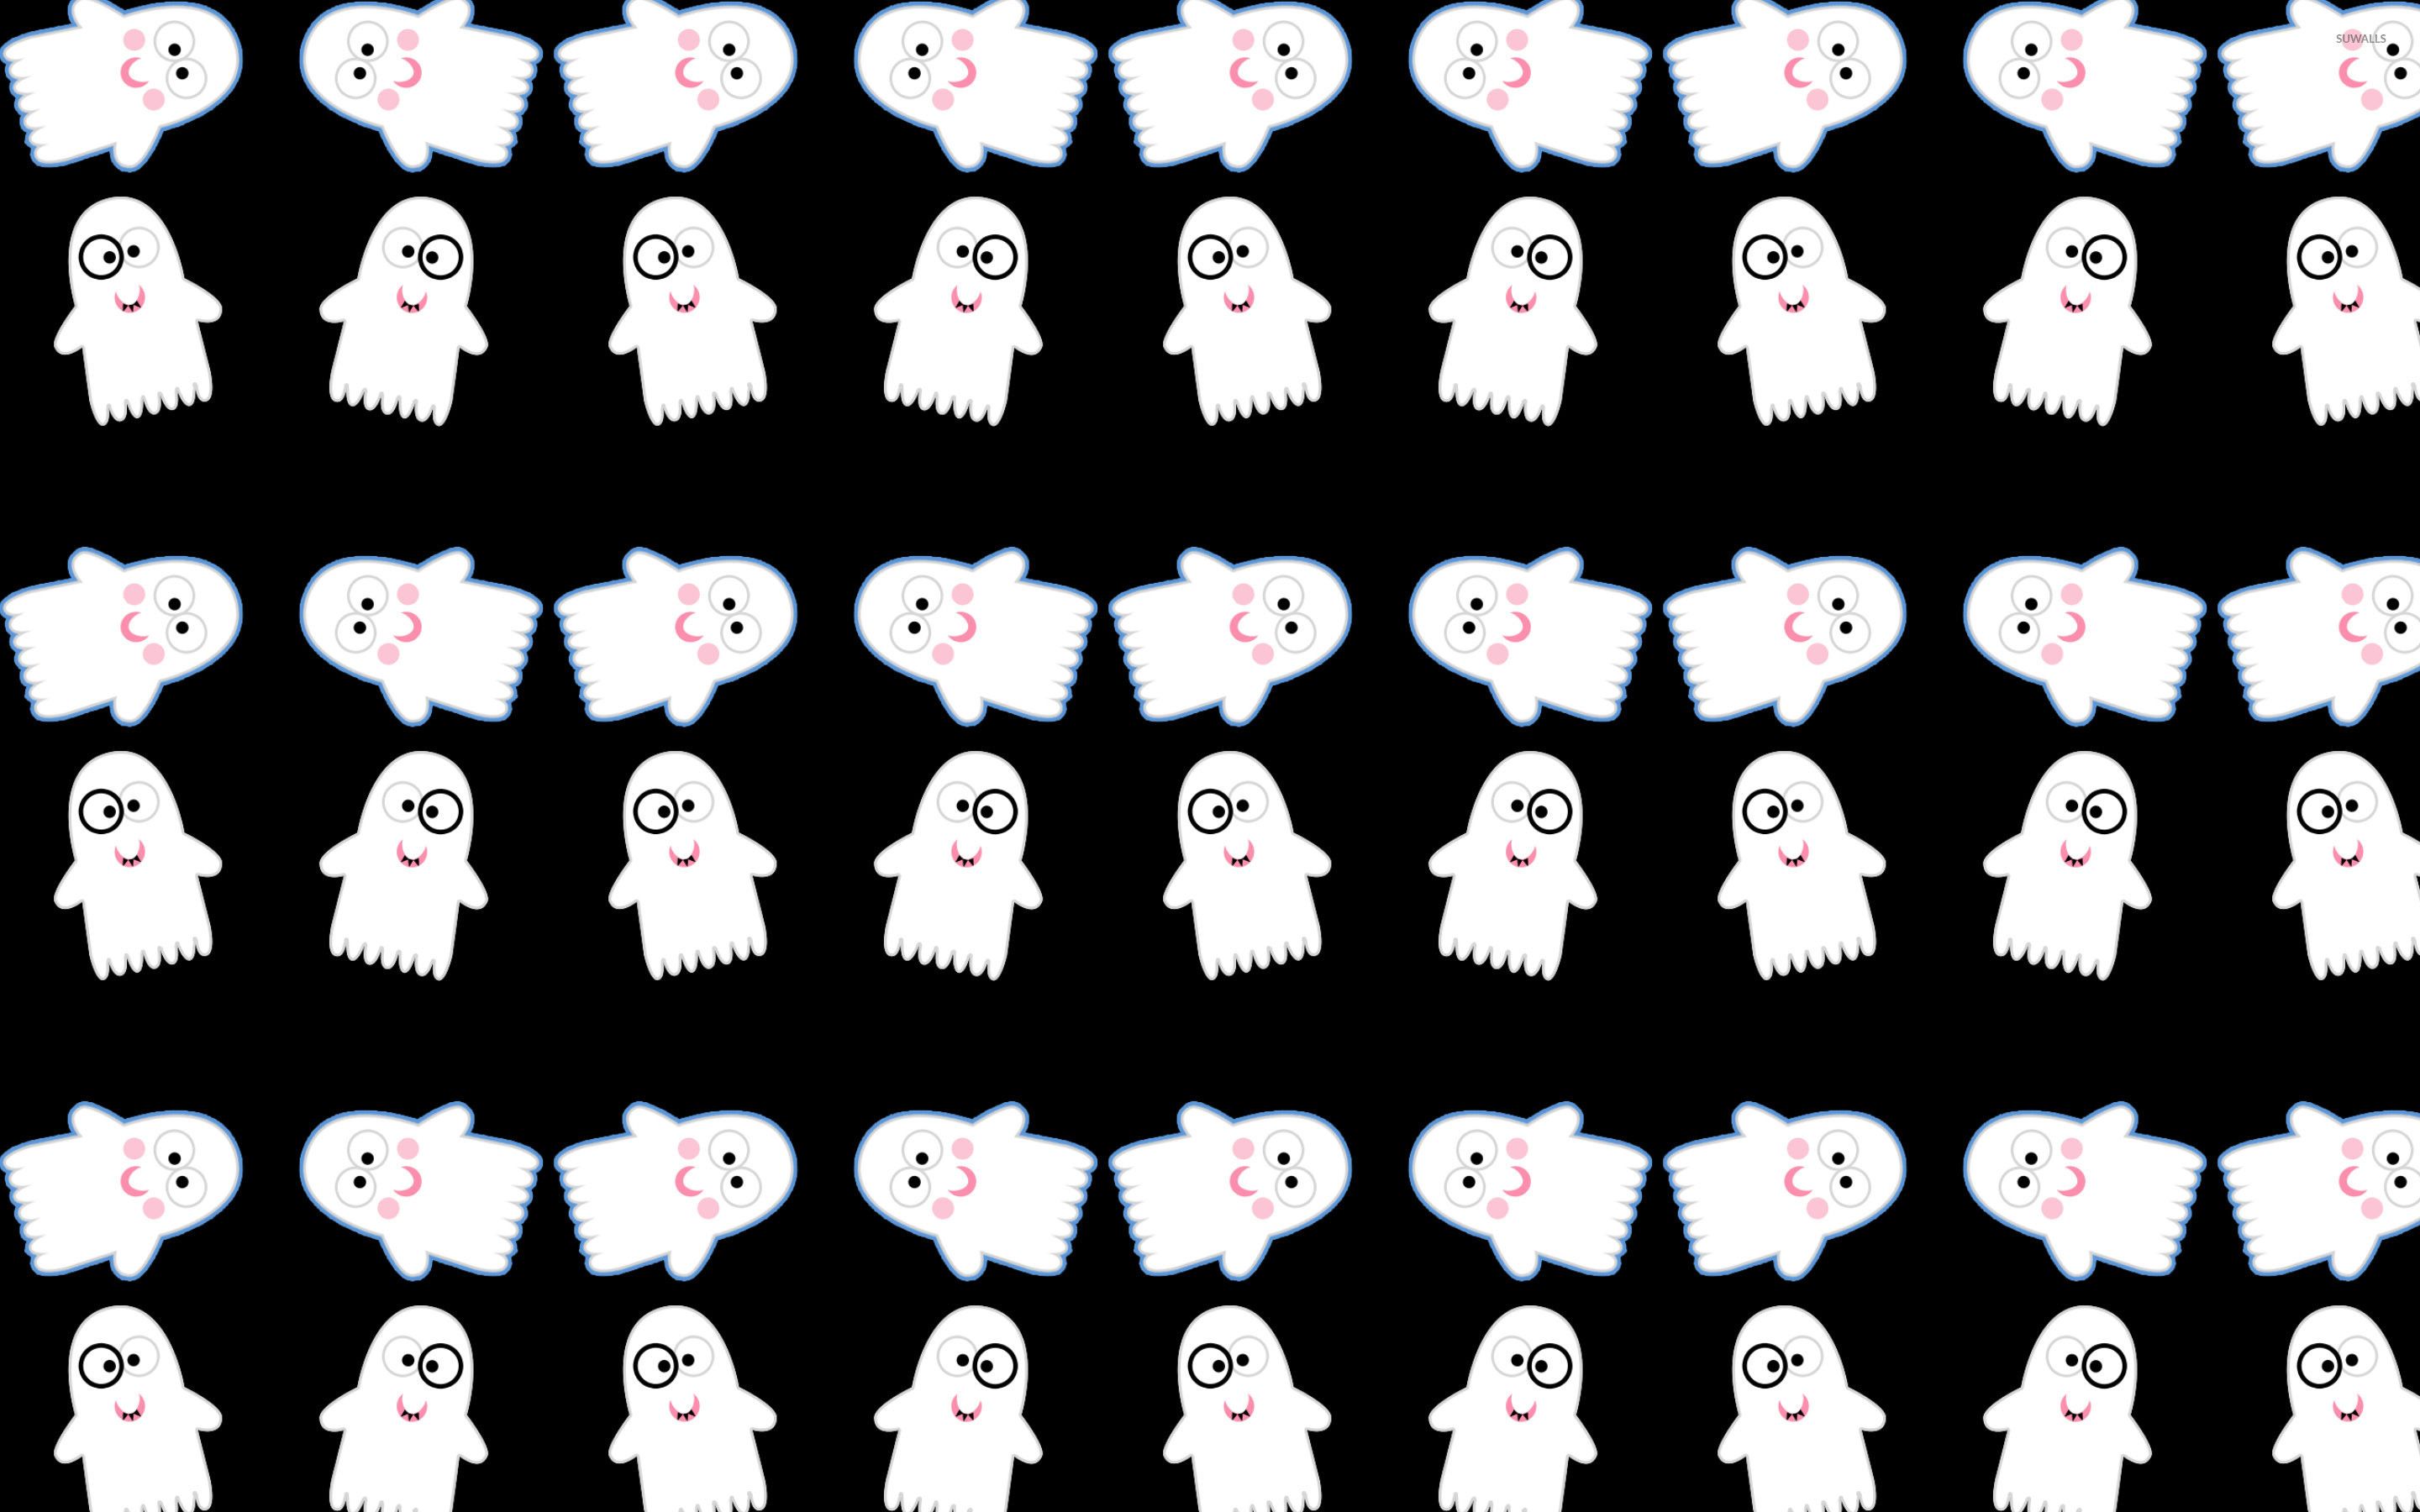 Cute Ghost Phone Wallpaper Background Wallpaper Image For Free Download   Pngtree